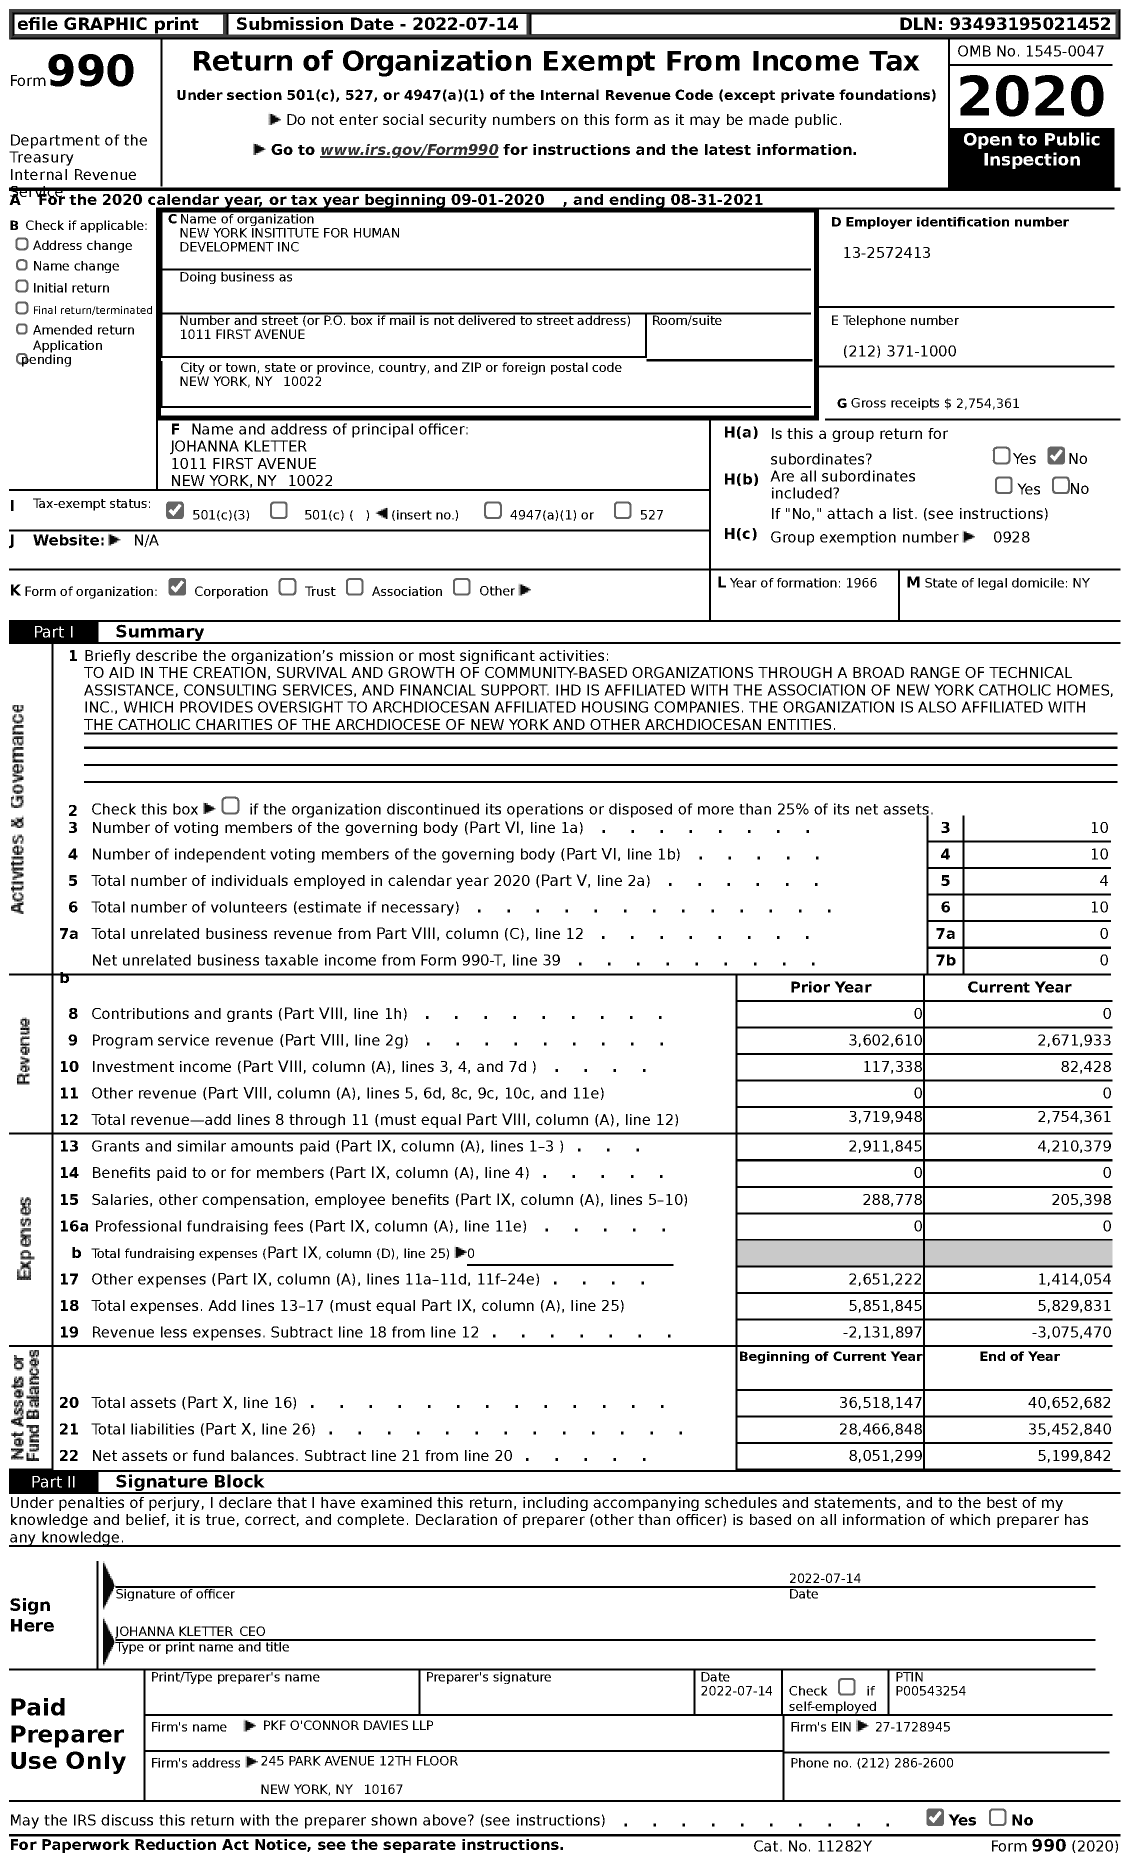 Image of first page of 2020 Form 990 for New York Insititute for Human Development